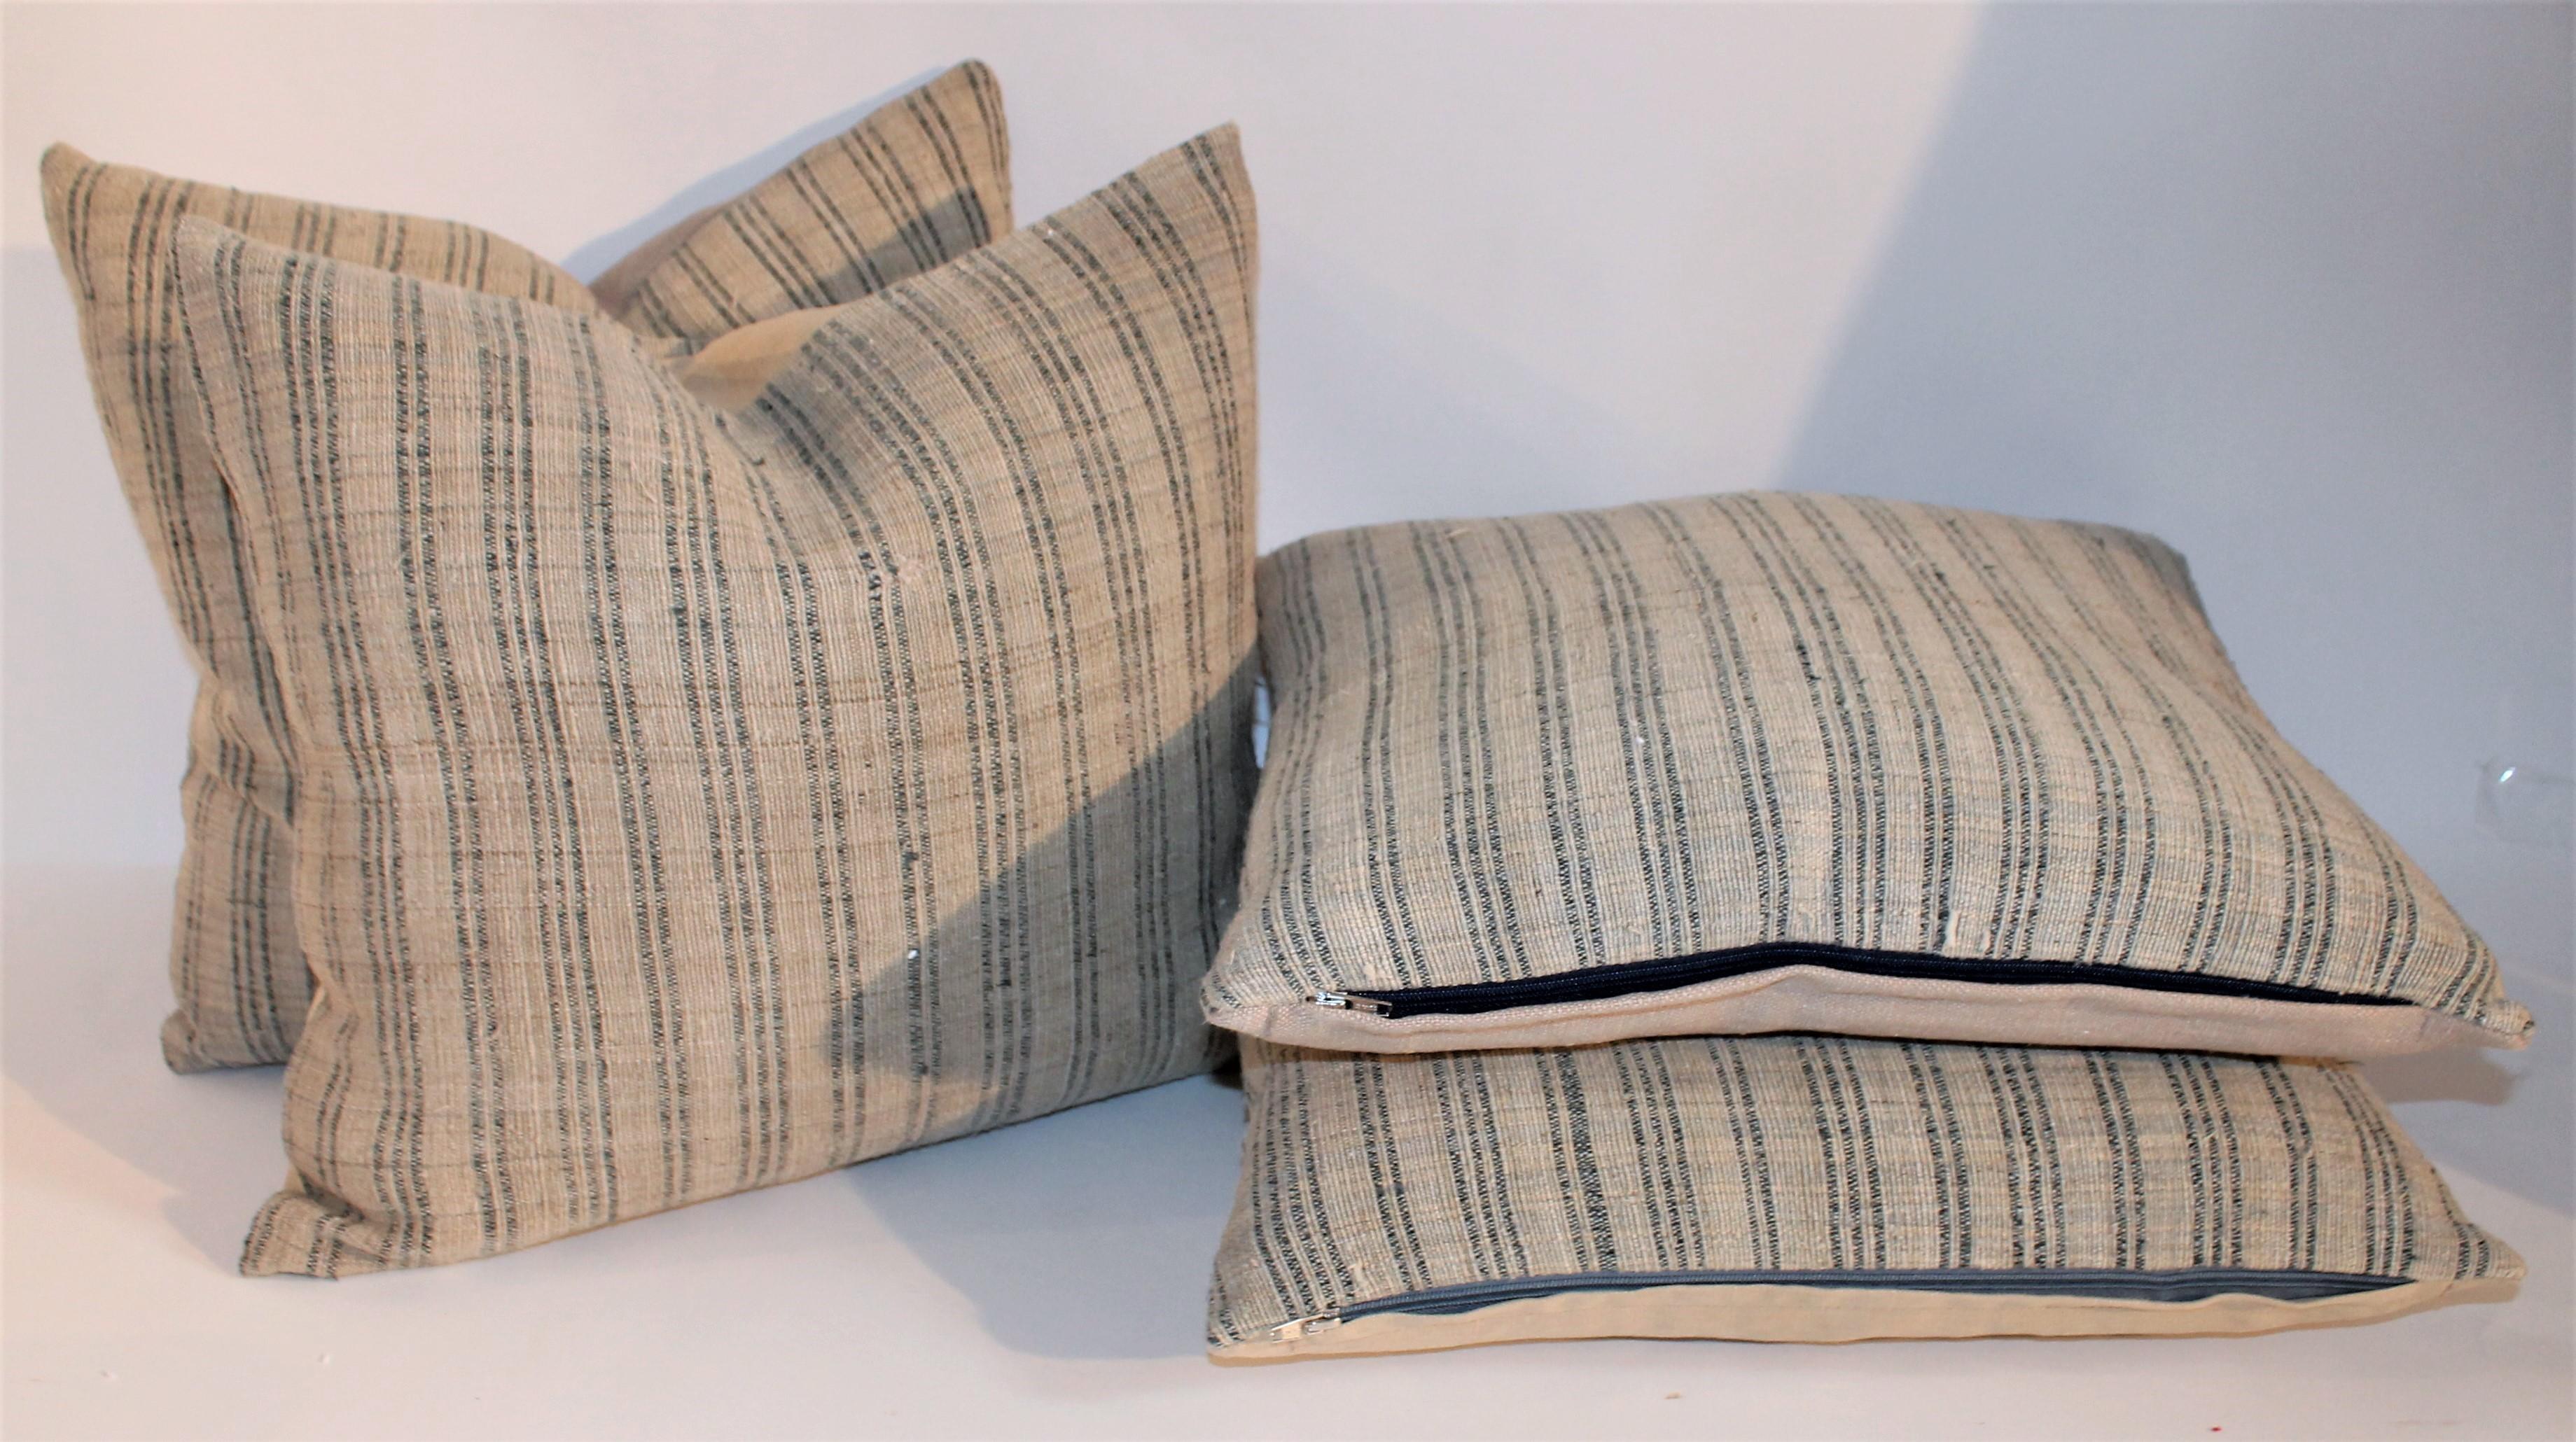 These homespun linen ticking pillows are in pristine condition and have natural linen backing. These natural linen with light blue stripes are very rich and yet country.